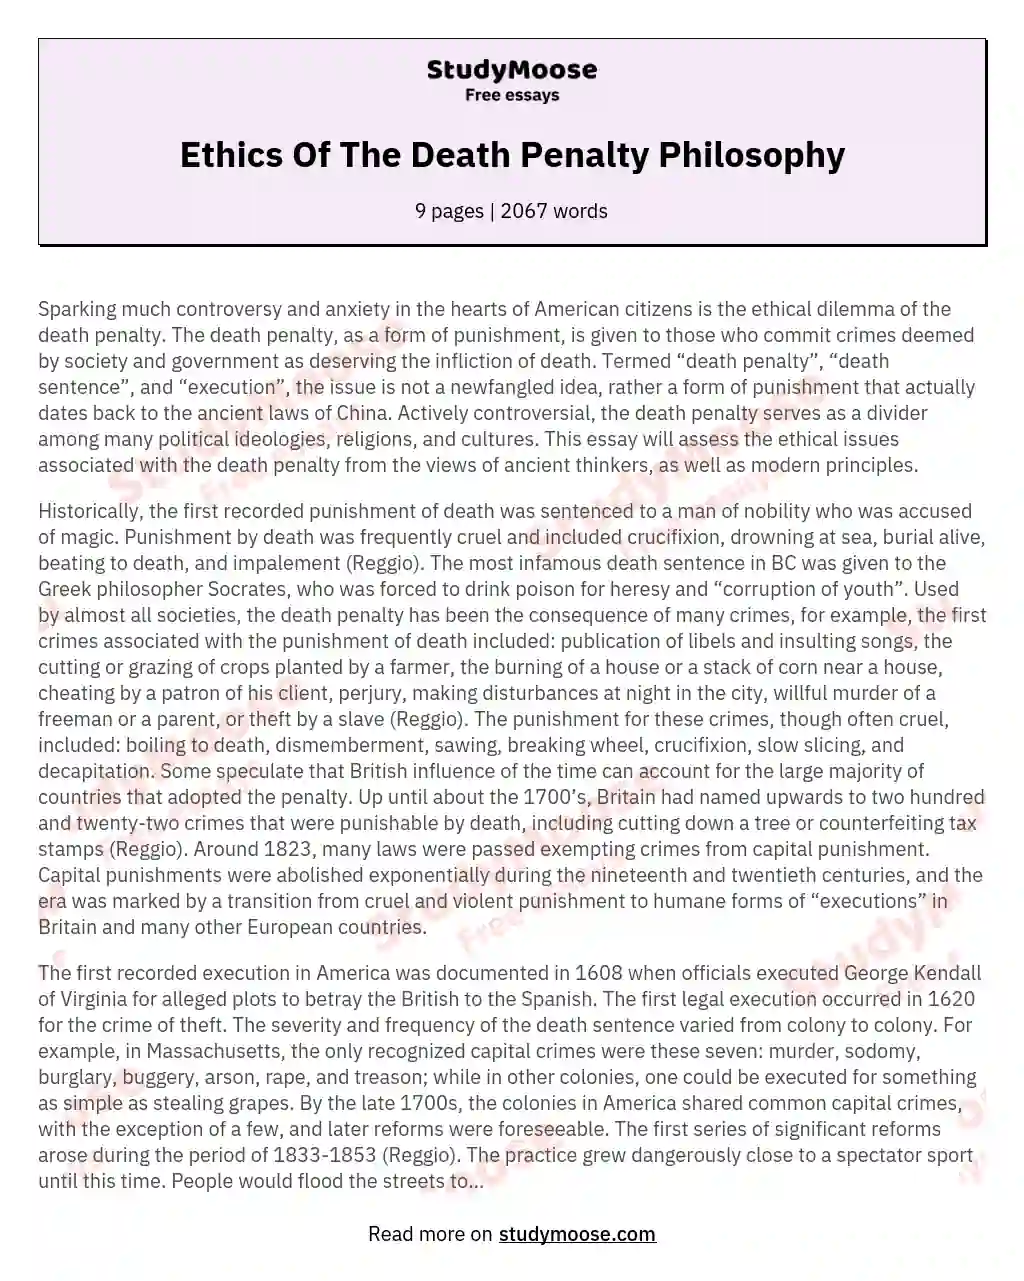 Ethics Of The Death Penalty Philosophy